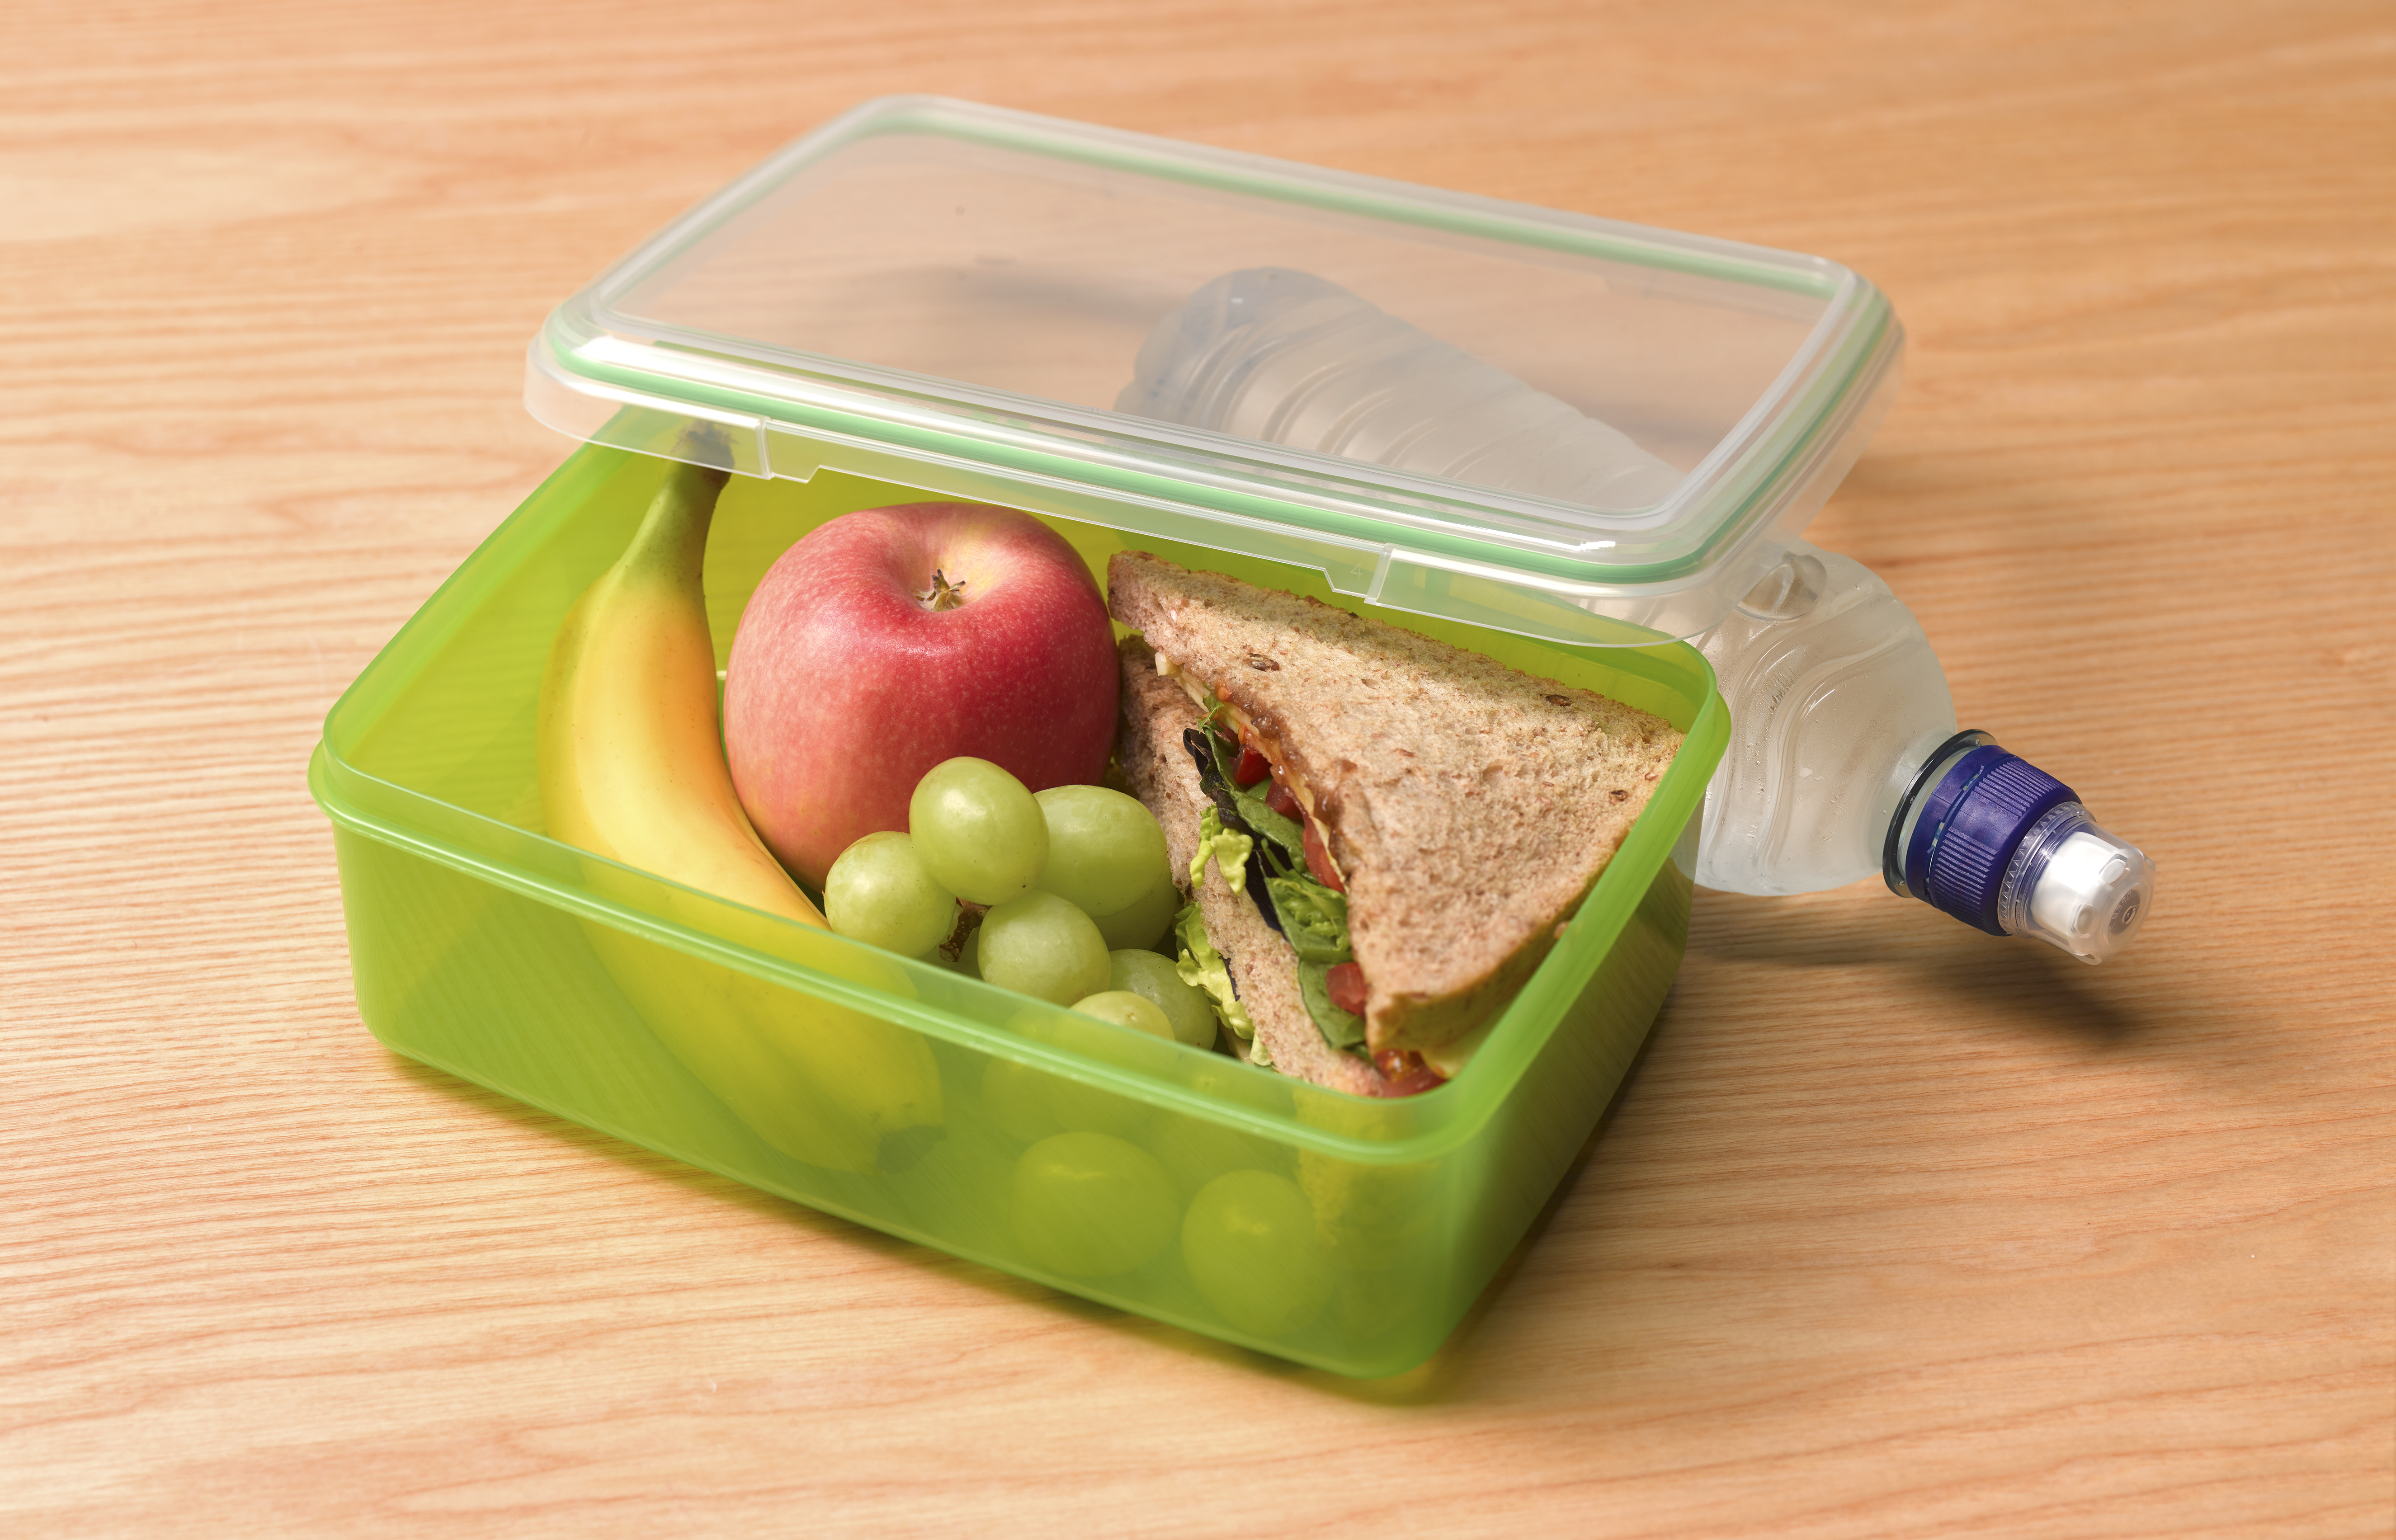 Foods like wholegrain bread and bananas can help your child focus at school by boosting their energy levels, experts say